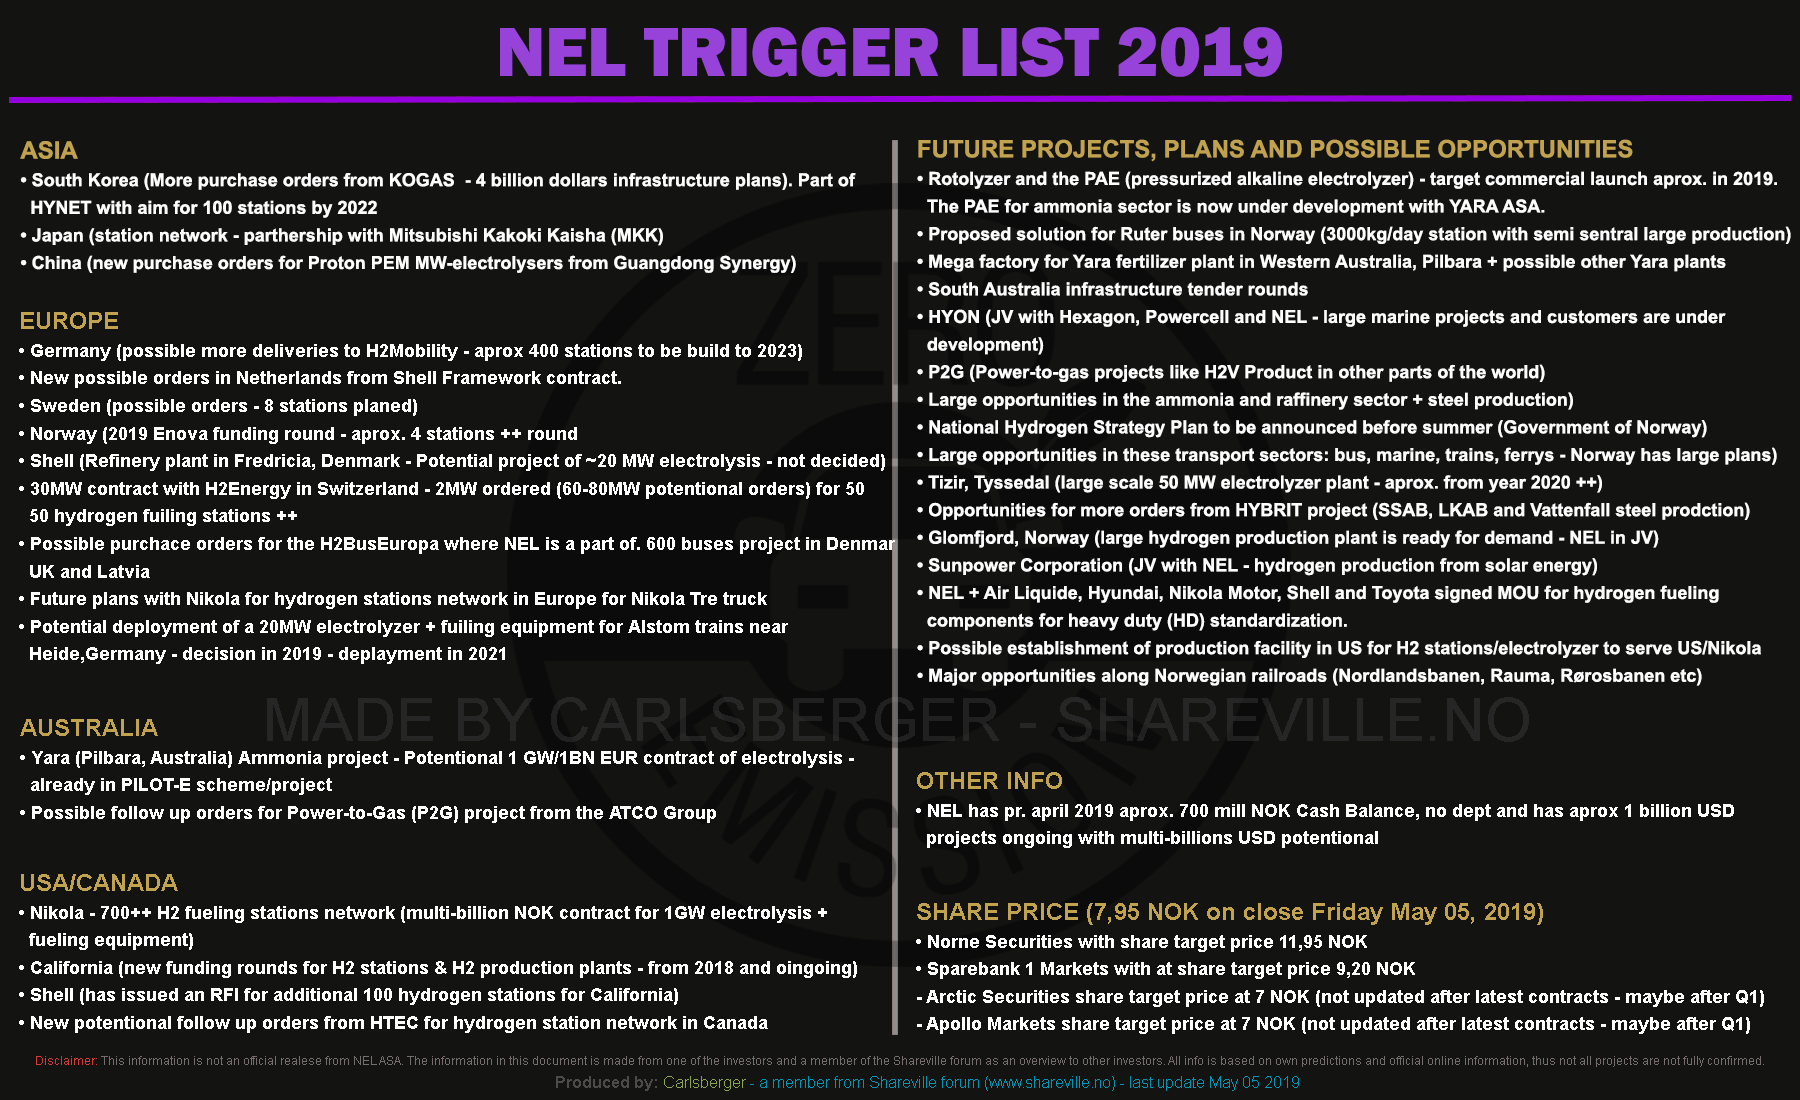 1557063142-triggers2019-may05-2019.png